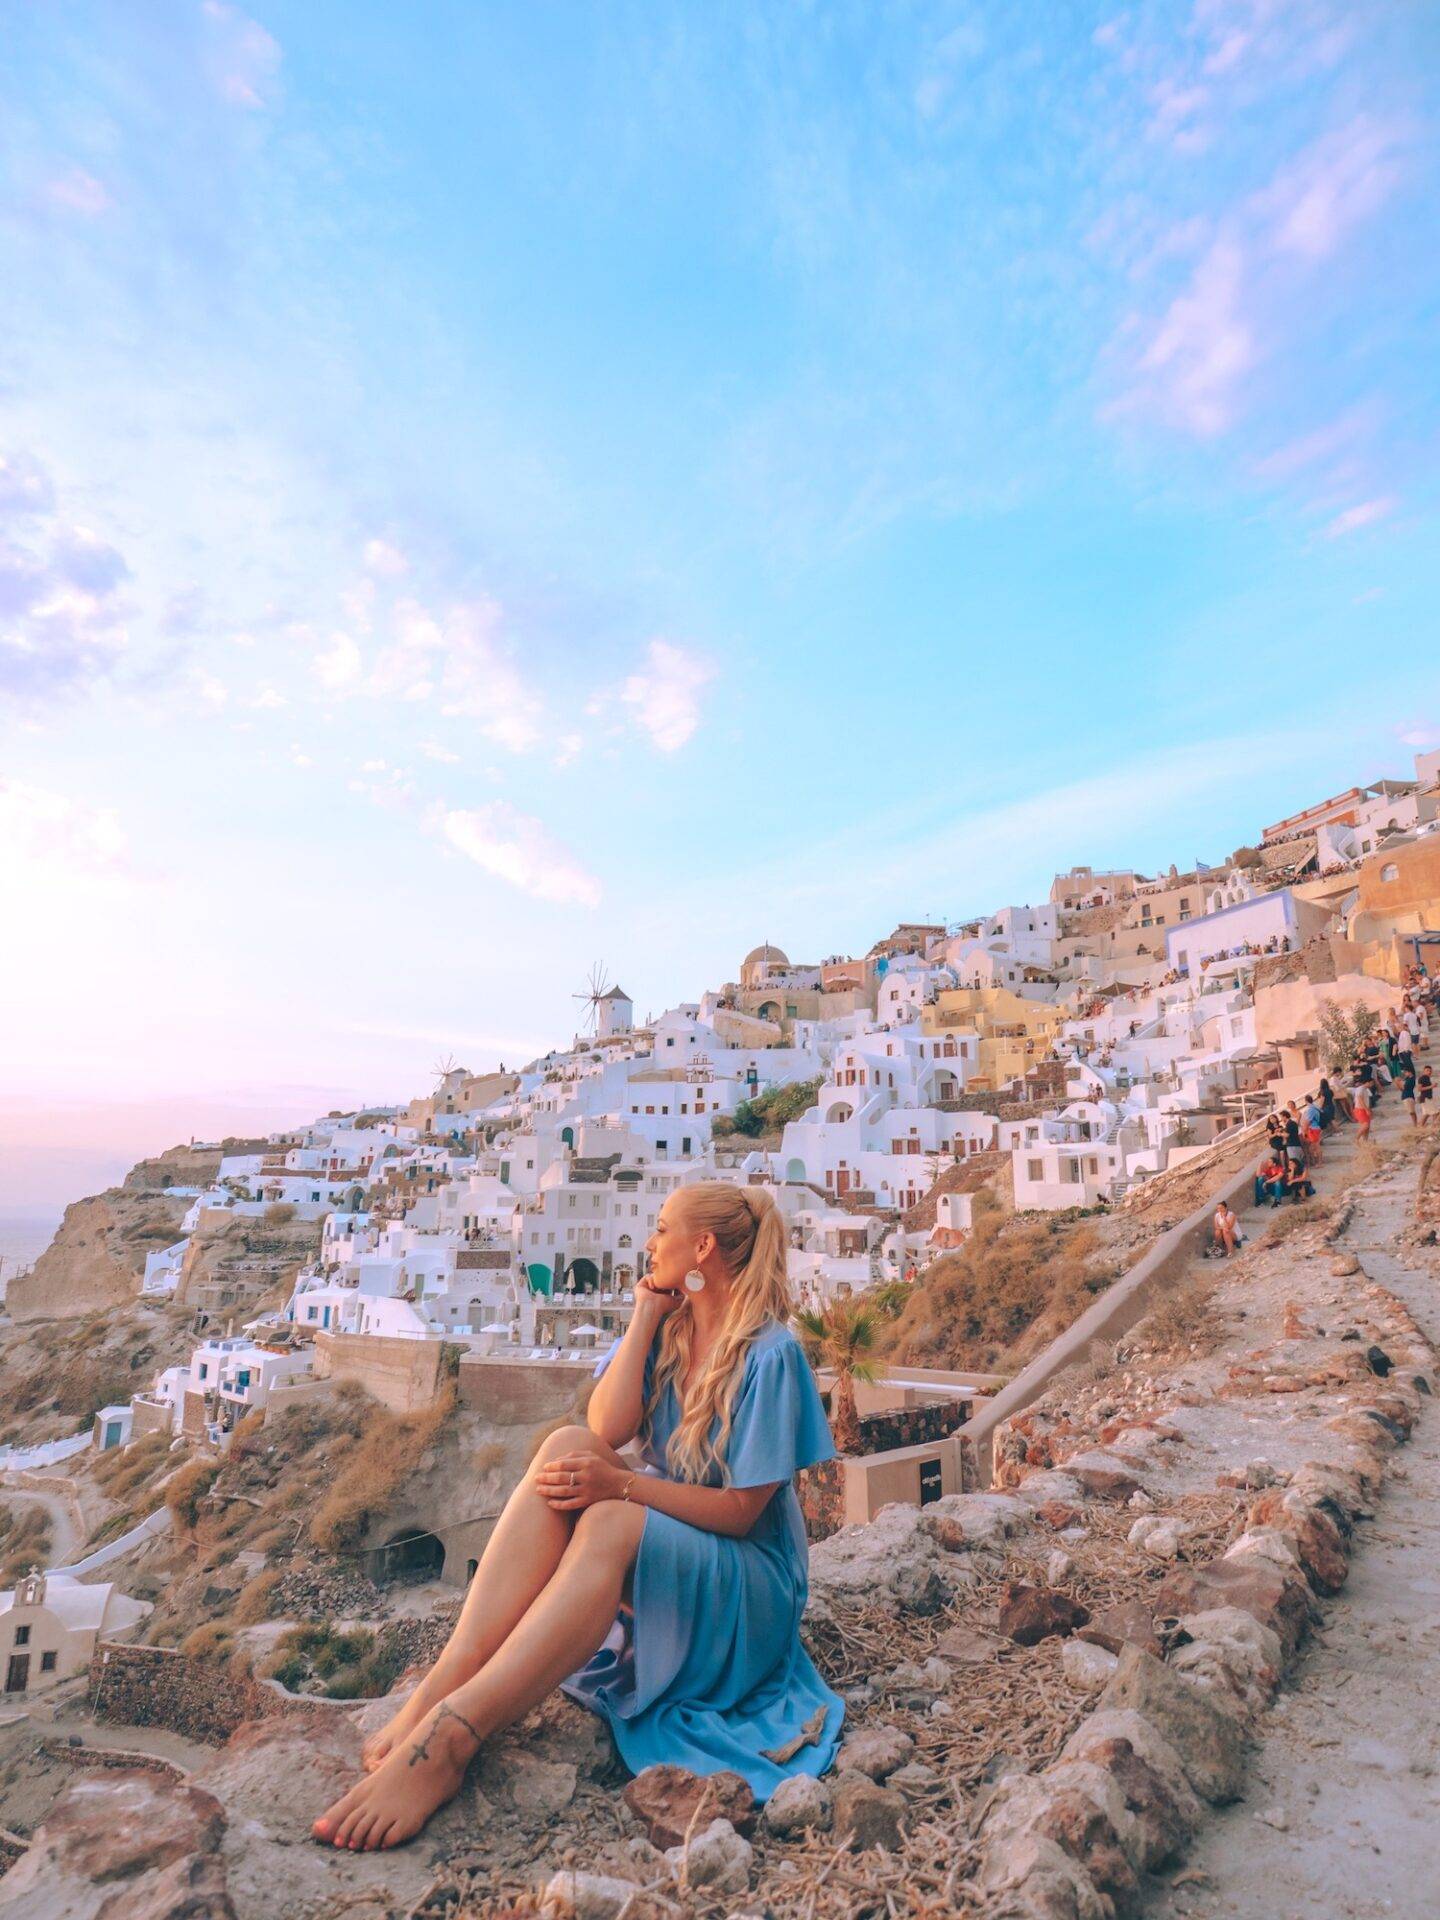 The Best Photo spots and Most instagrammable places in Santorini: Sunset at Byzantine Castle. Click the photo to see the rest of my list of the best instagram photo spots in Santorini!